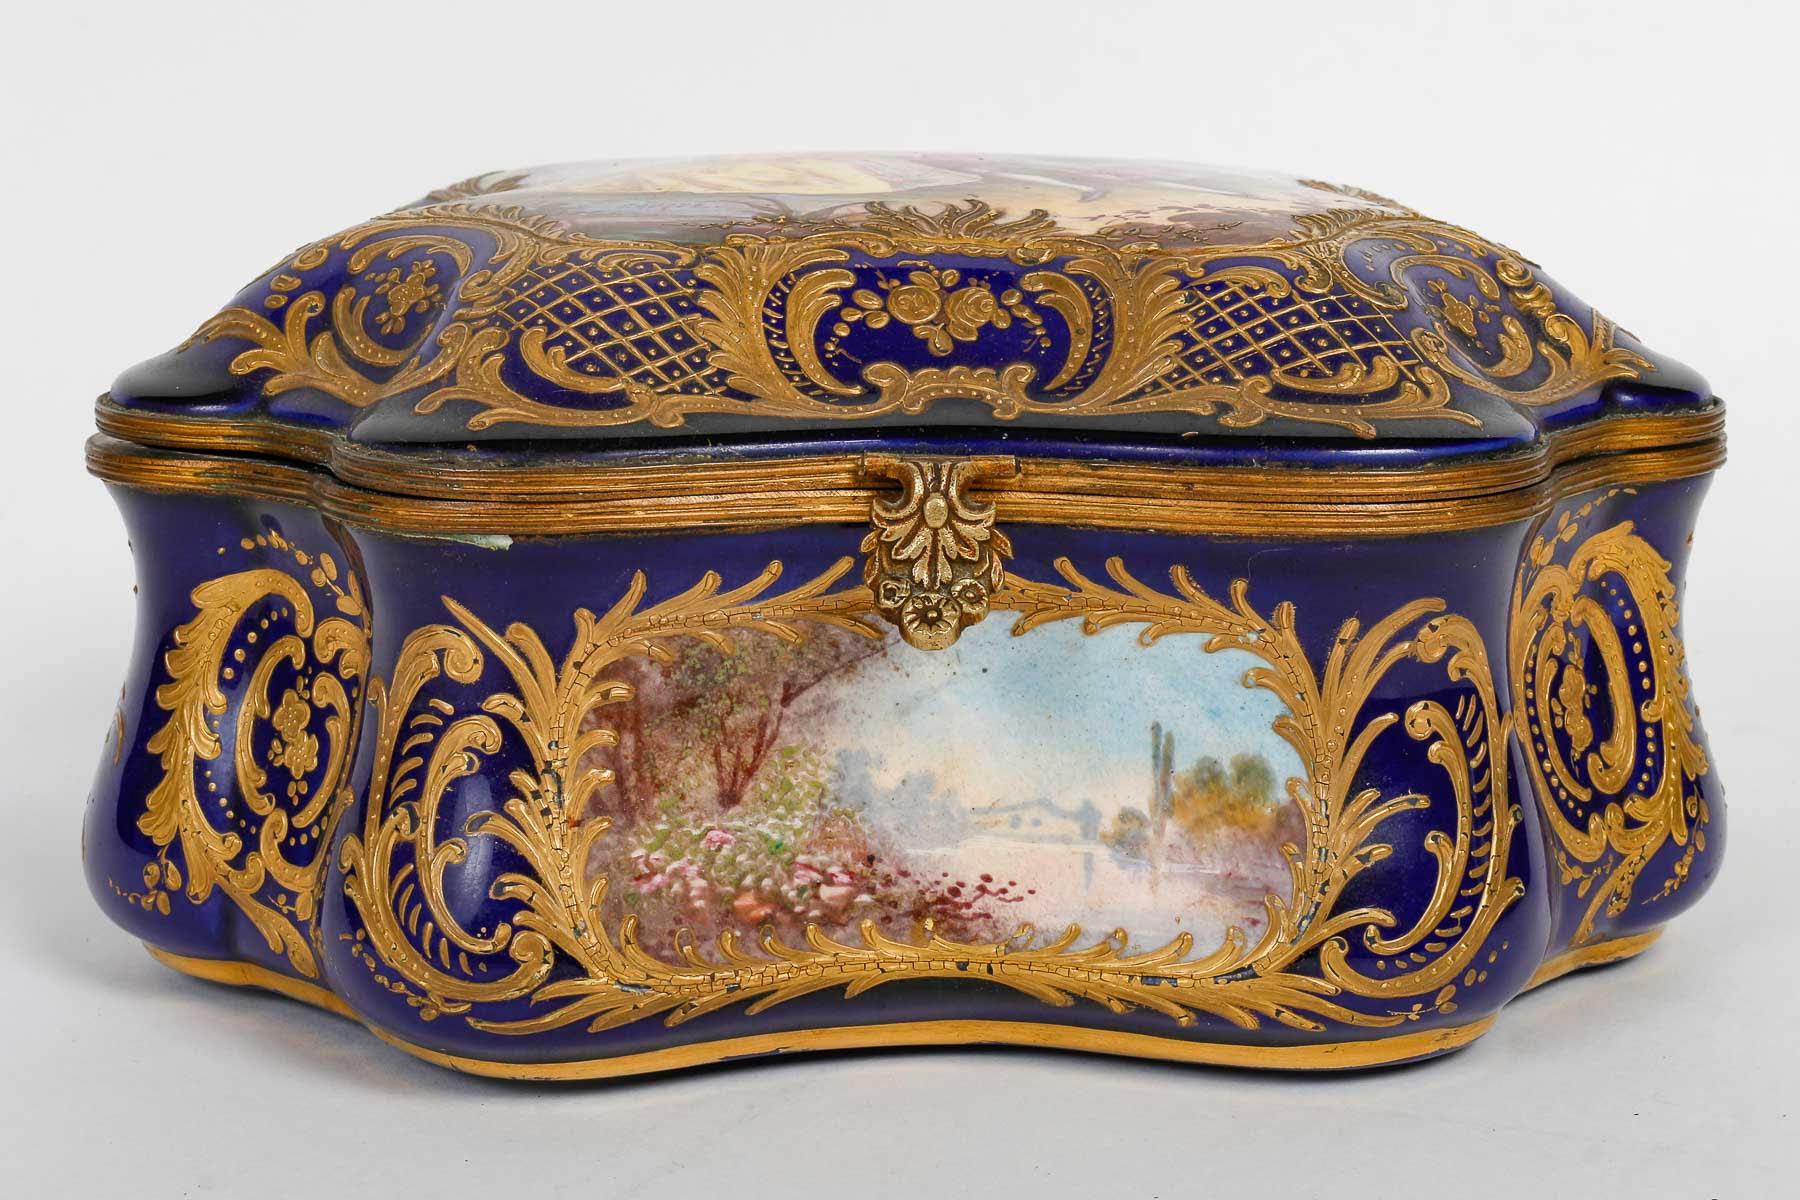 Sèvres porcelain box and chest, 19th century.

A Sèvres porcelain box, richly decorated with 3 paintings on the belt and one on the top, enhanced with gold, Napoleon III period, 19th century.

H: 11cm, W: 22cm, D: 17.5cm